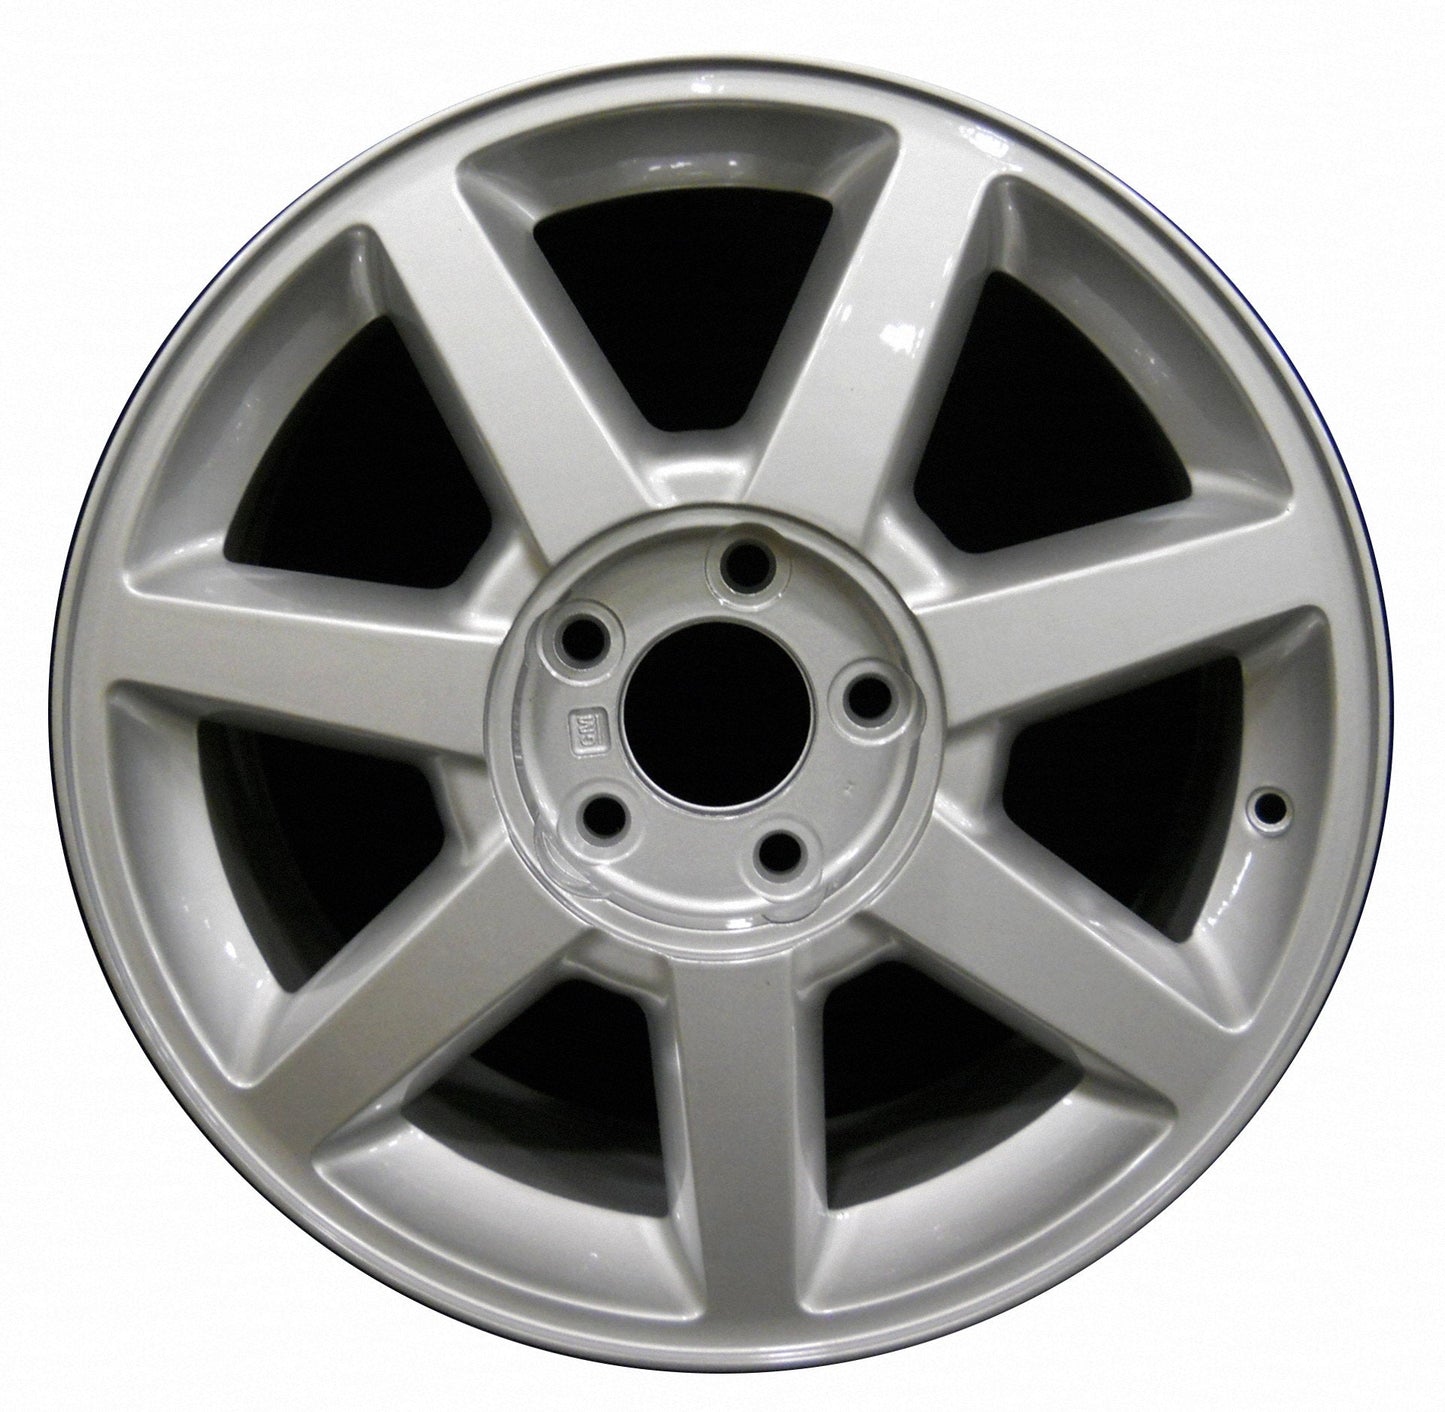 Cadillac CTS  2005, 2006, 2007, 2008 Factory OEM Car Wheel Size 17x8 Alloy WAO.4587RE.LS01.FF